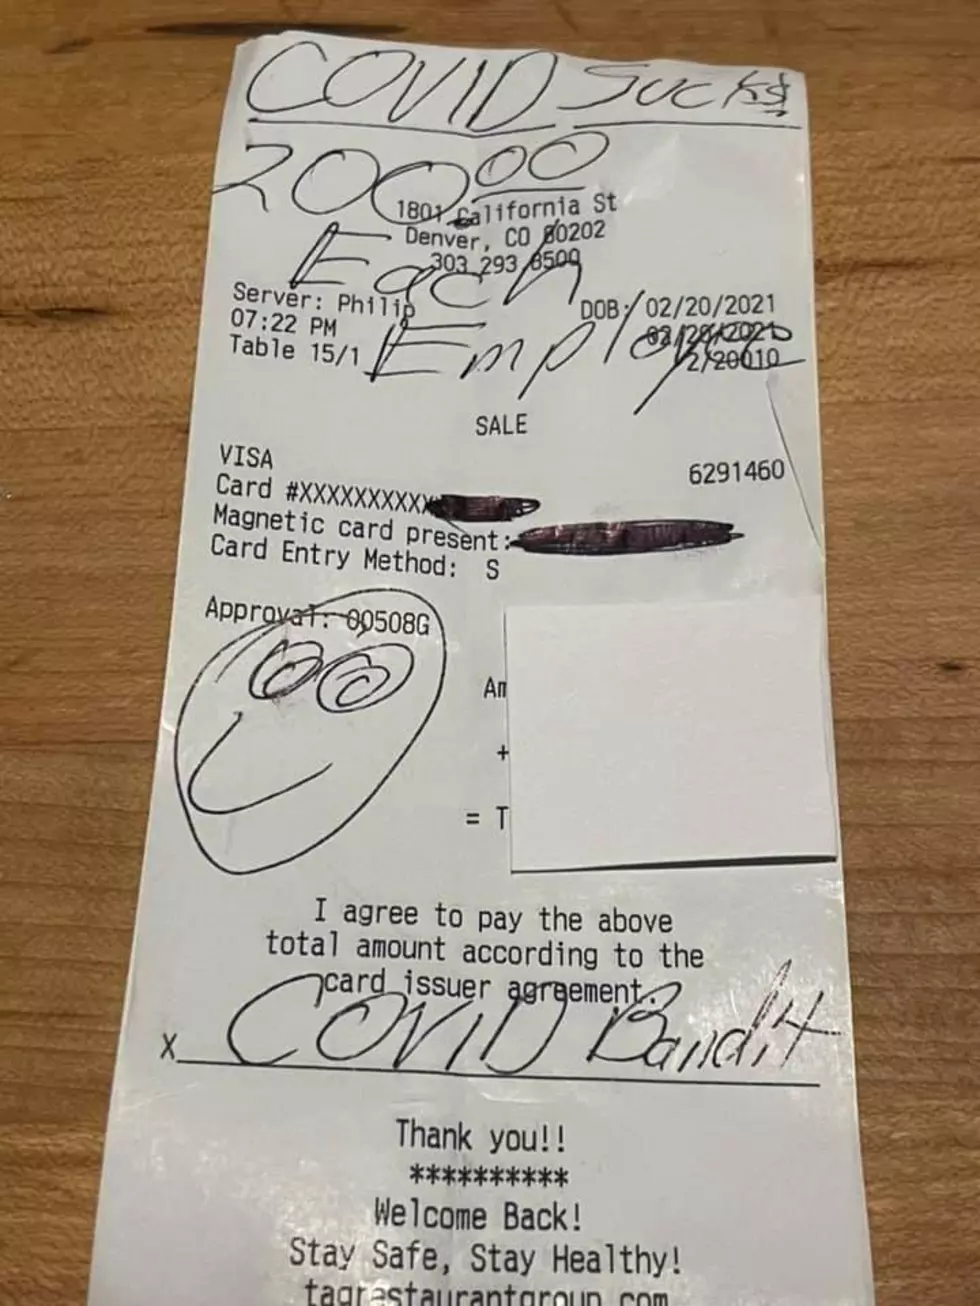 Colorado’s “COVID Bandit” Strikes Again With A $6,800 Tip